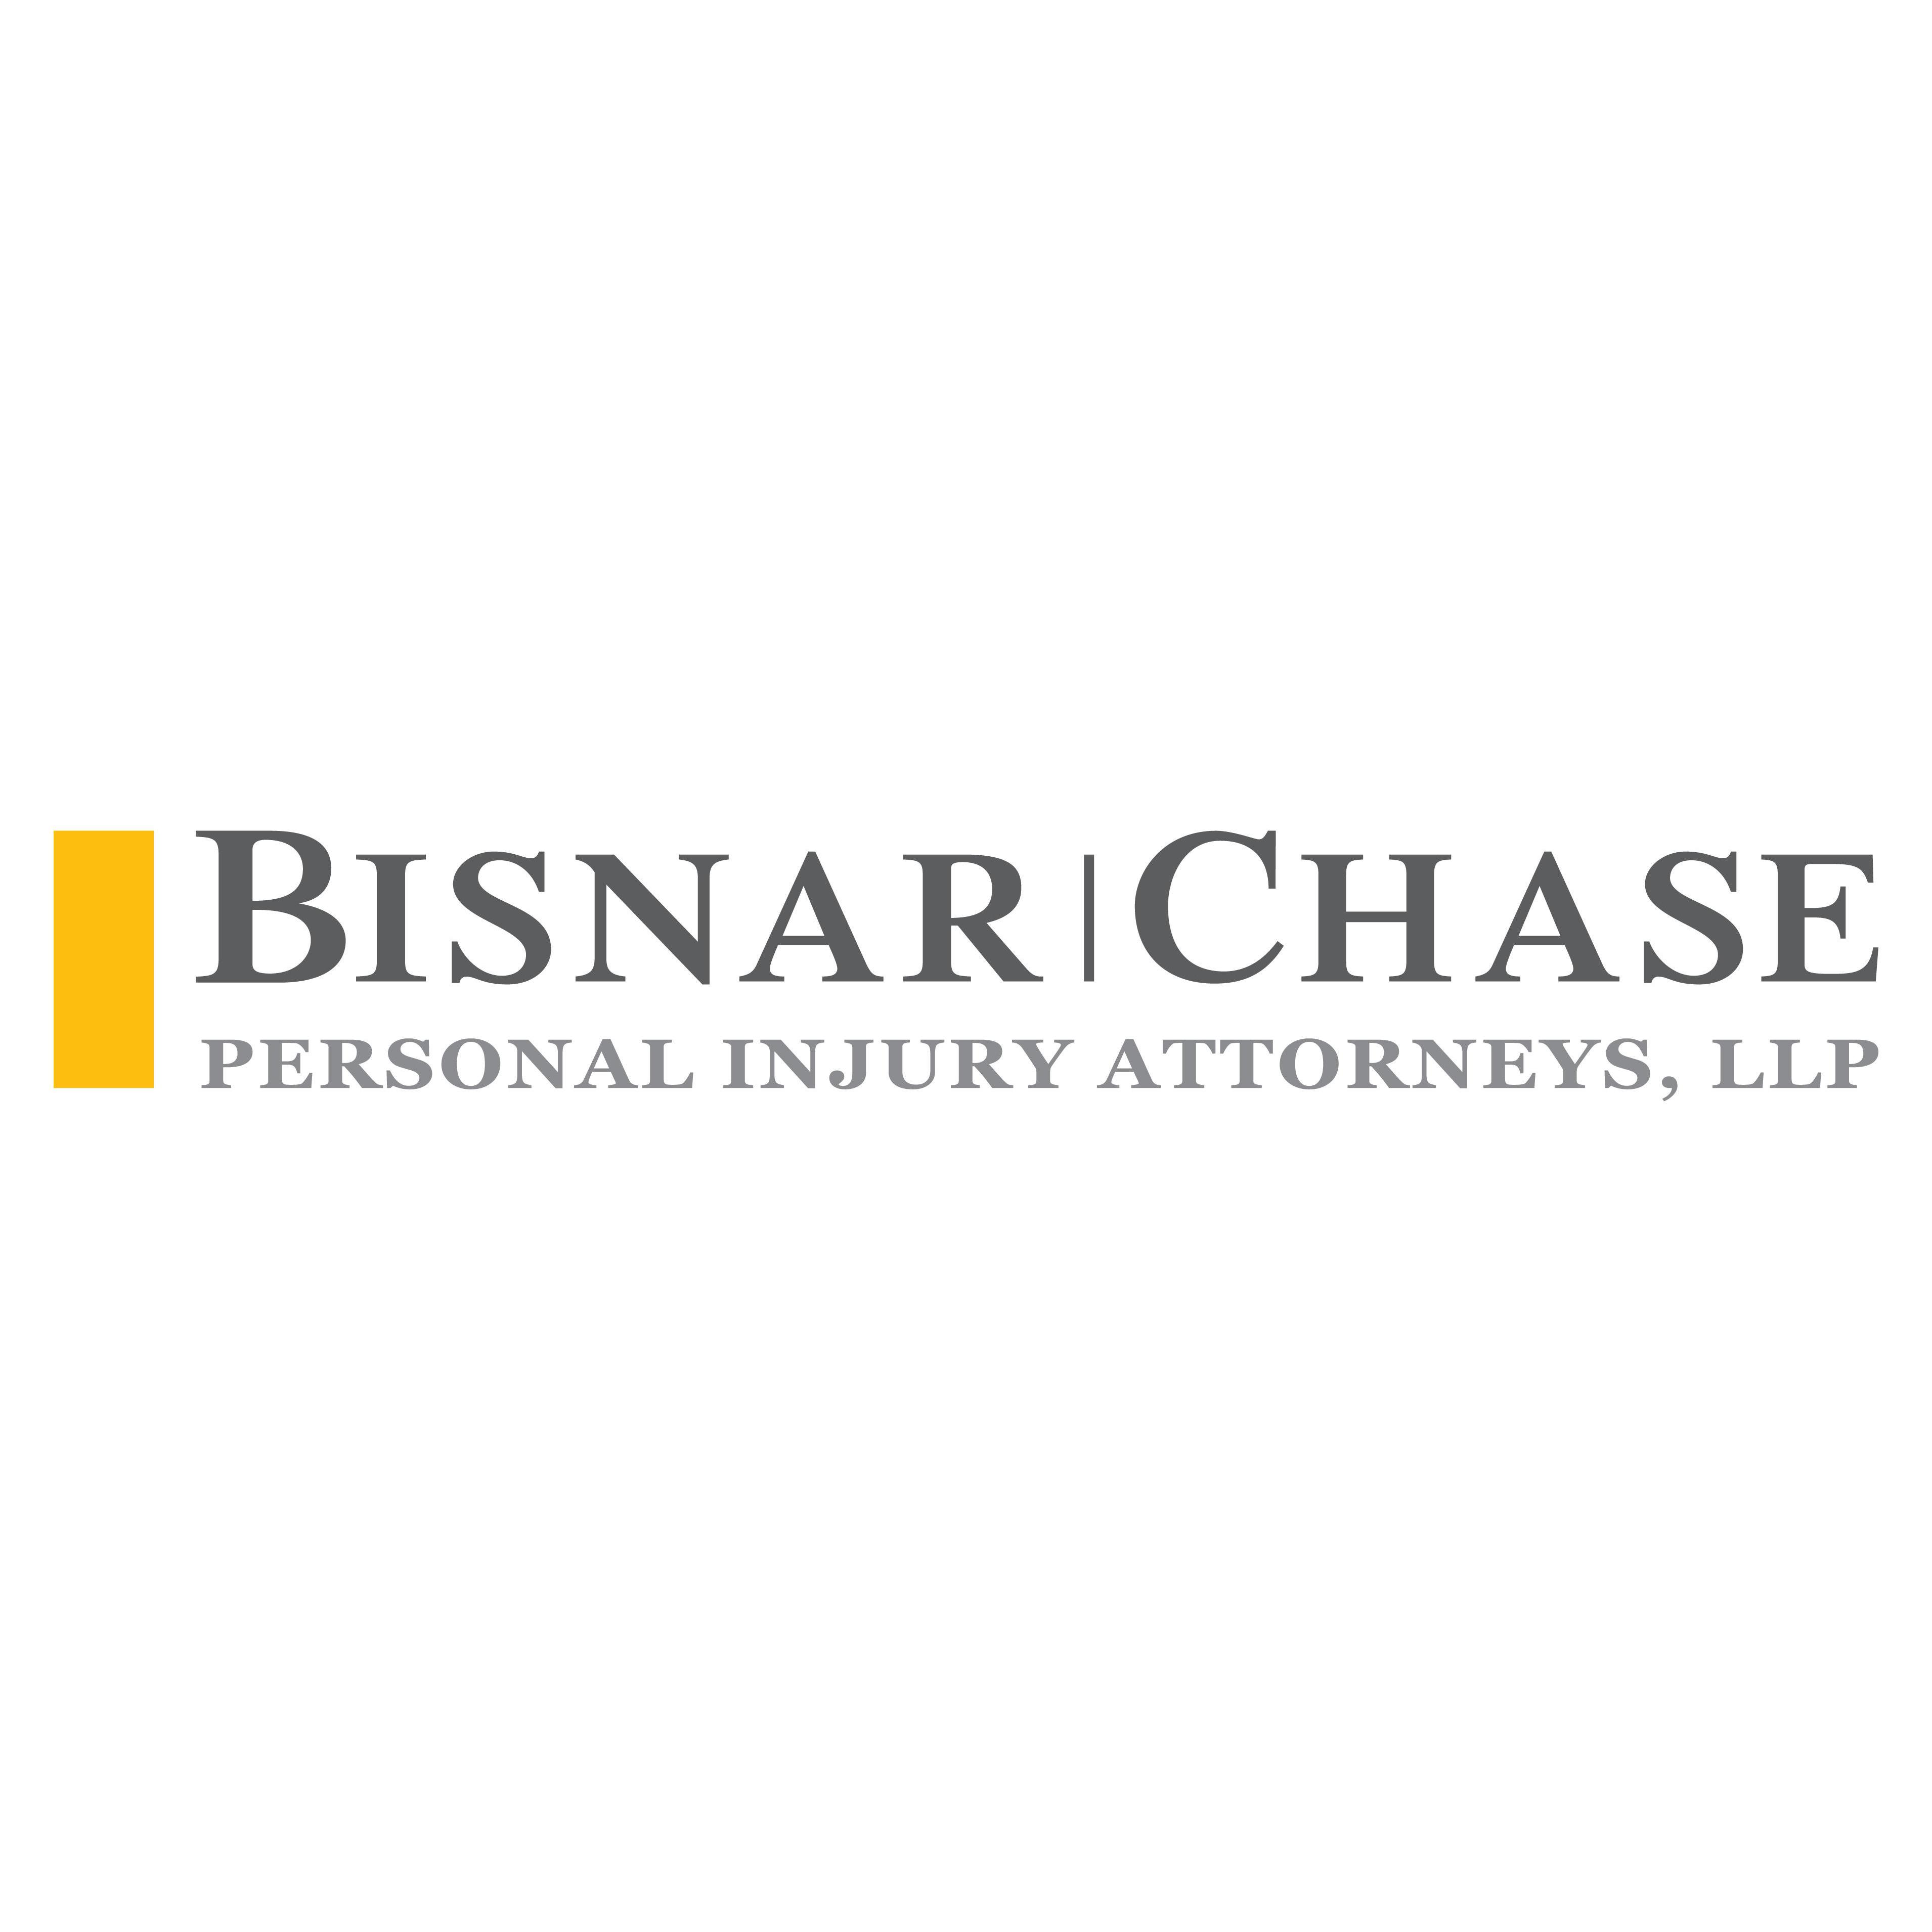 Bisnar Chase Personal Injury Attorneys, LLP - Los Angeles, CA 90045 - (323)238-4683 | ShowMeLocal.com